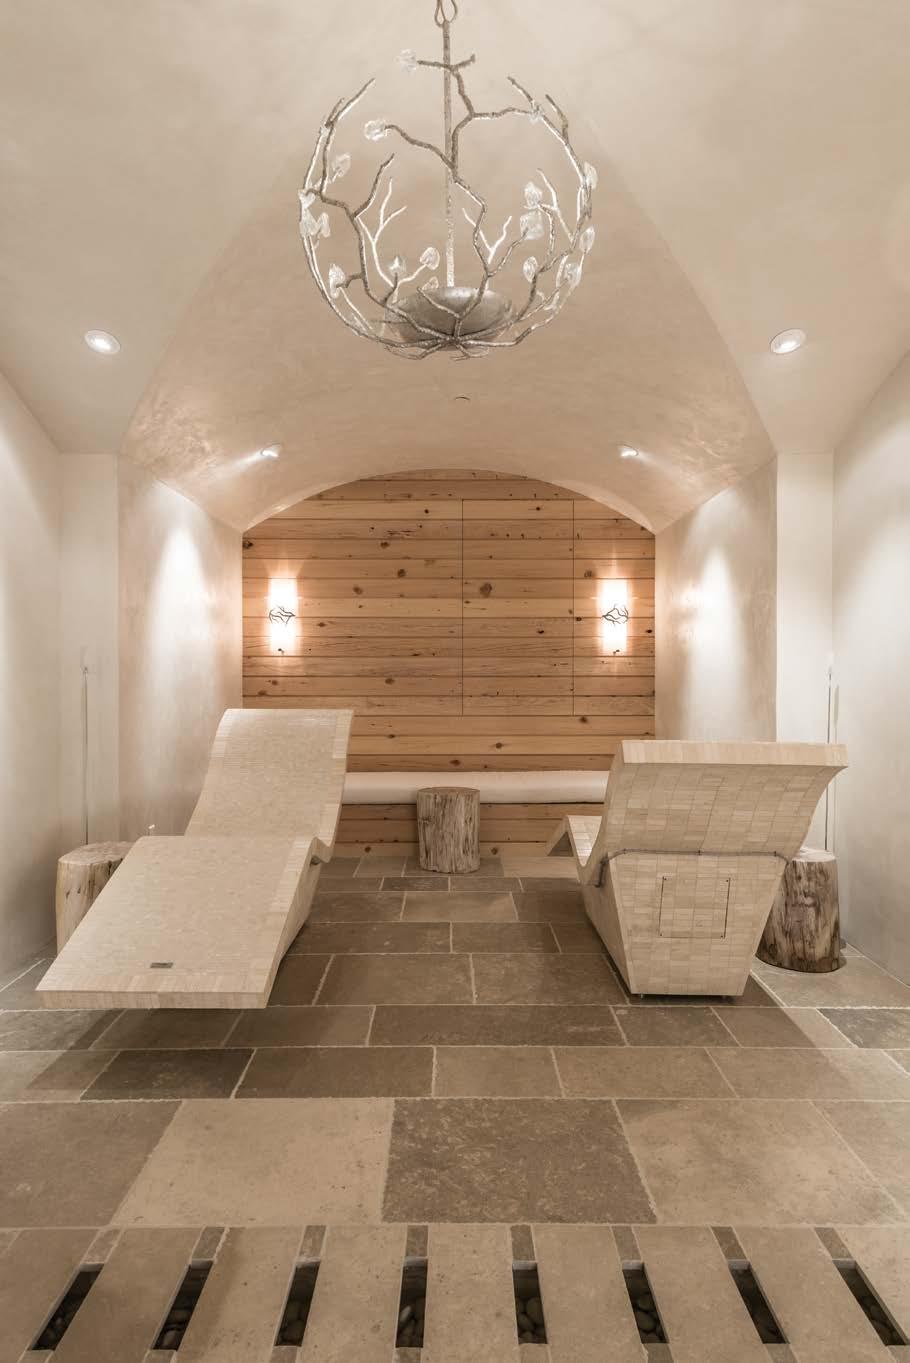 LEFT: A serene spa with vaulted ceiling features tiled heated loungers, a waterfall feature that runs along a trough under the floor and an ethereal